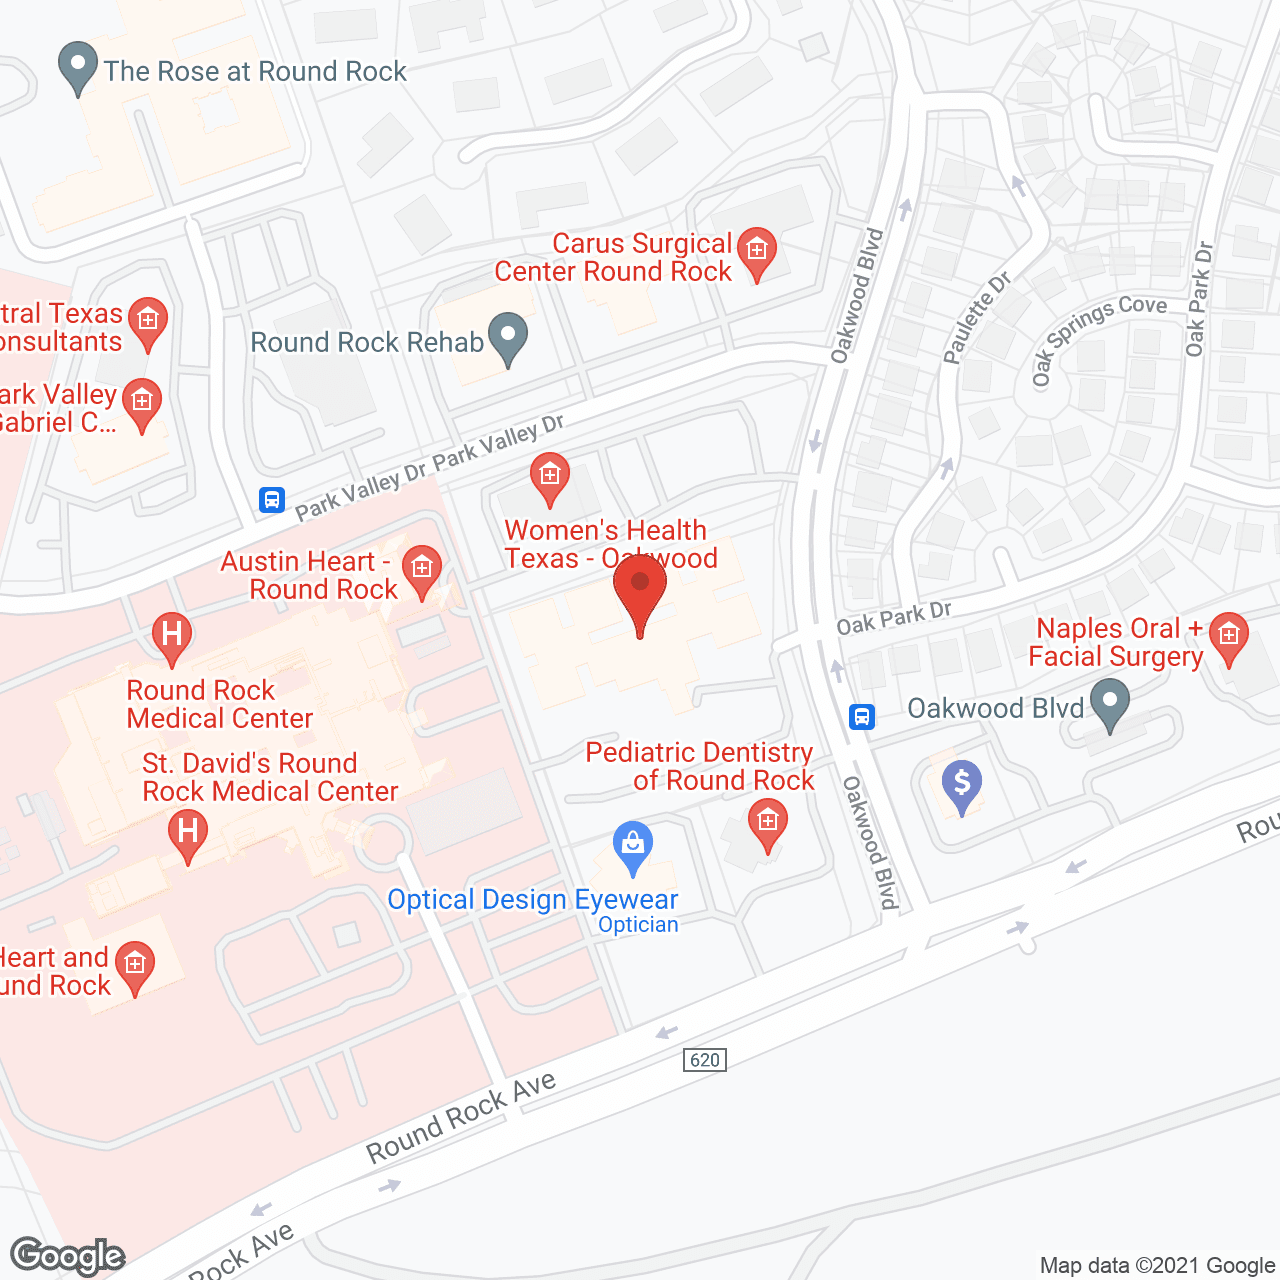 Hearthstone of Round Rock in google map